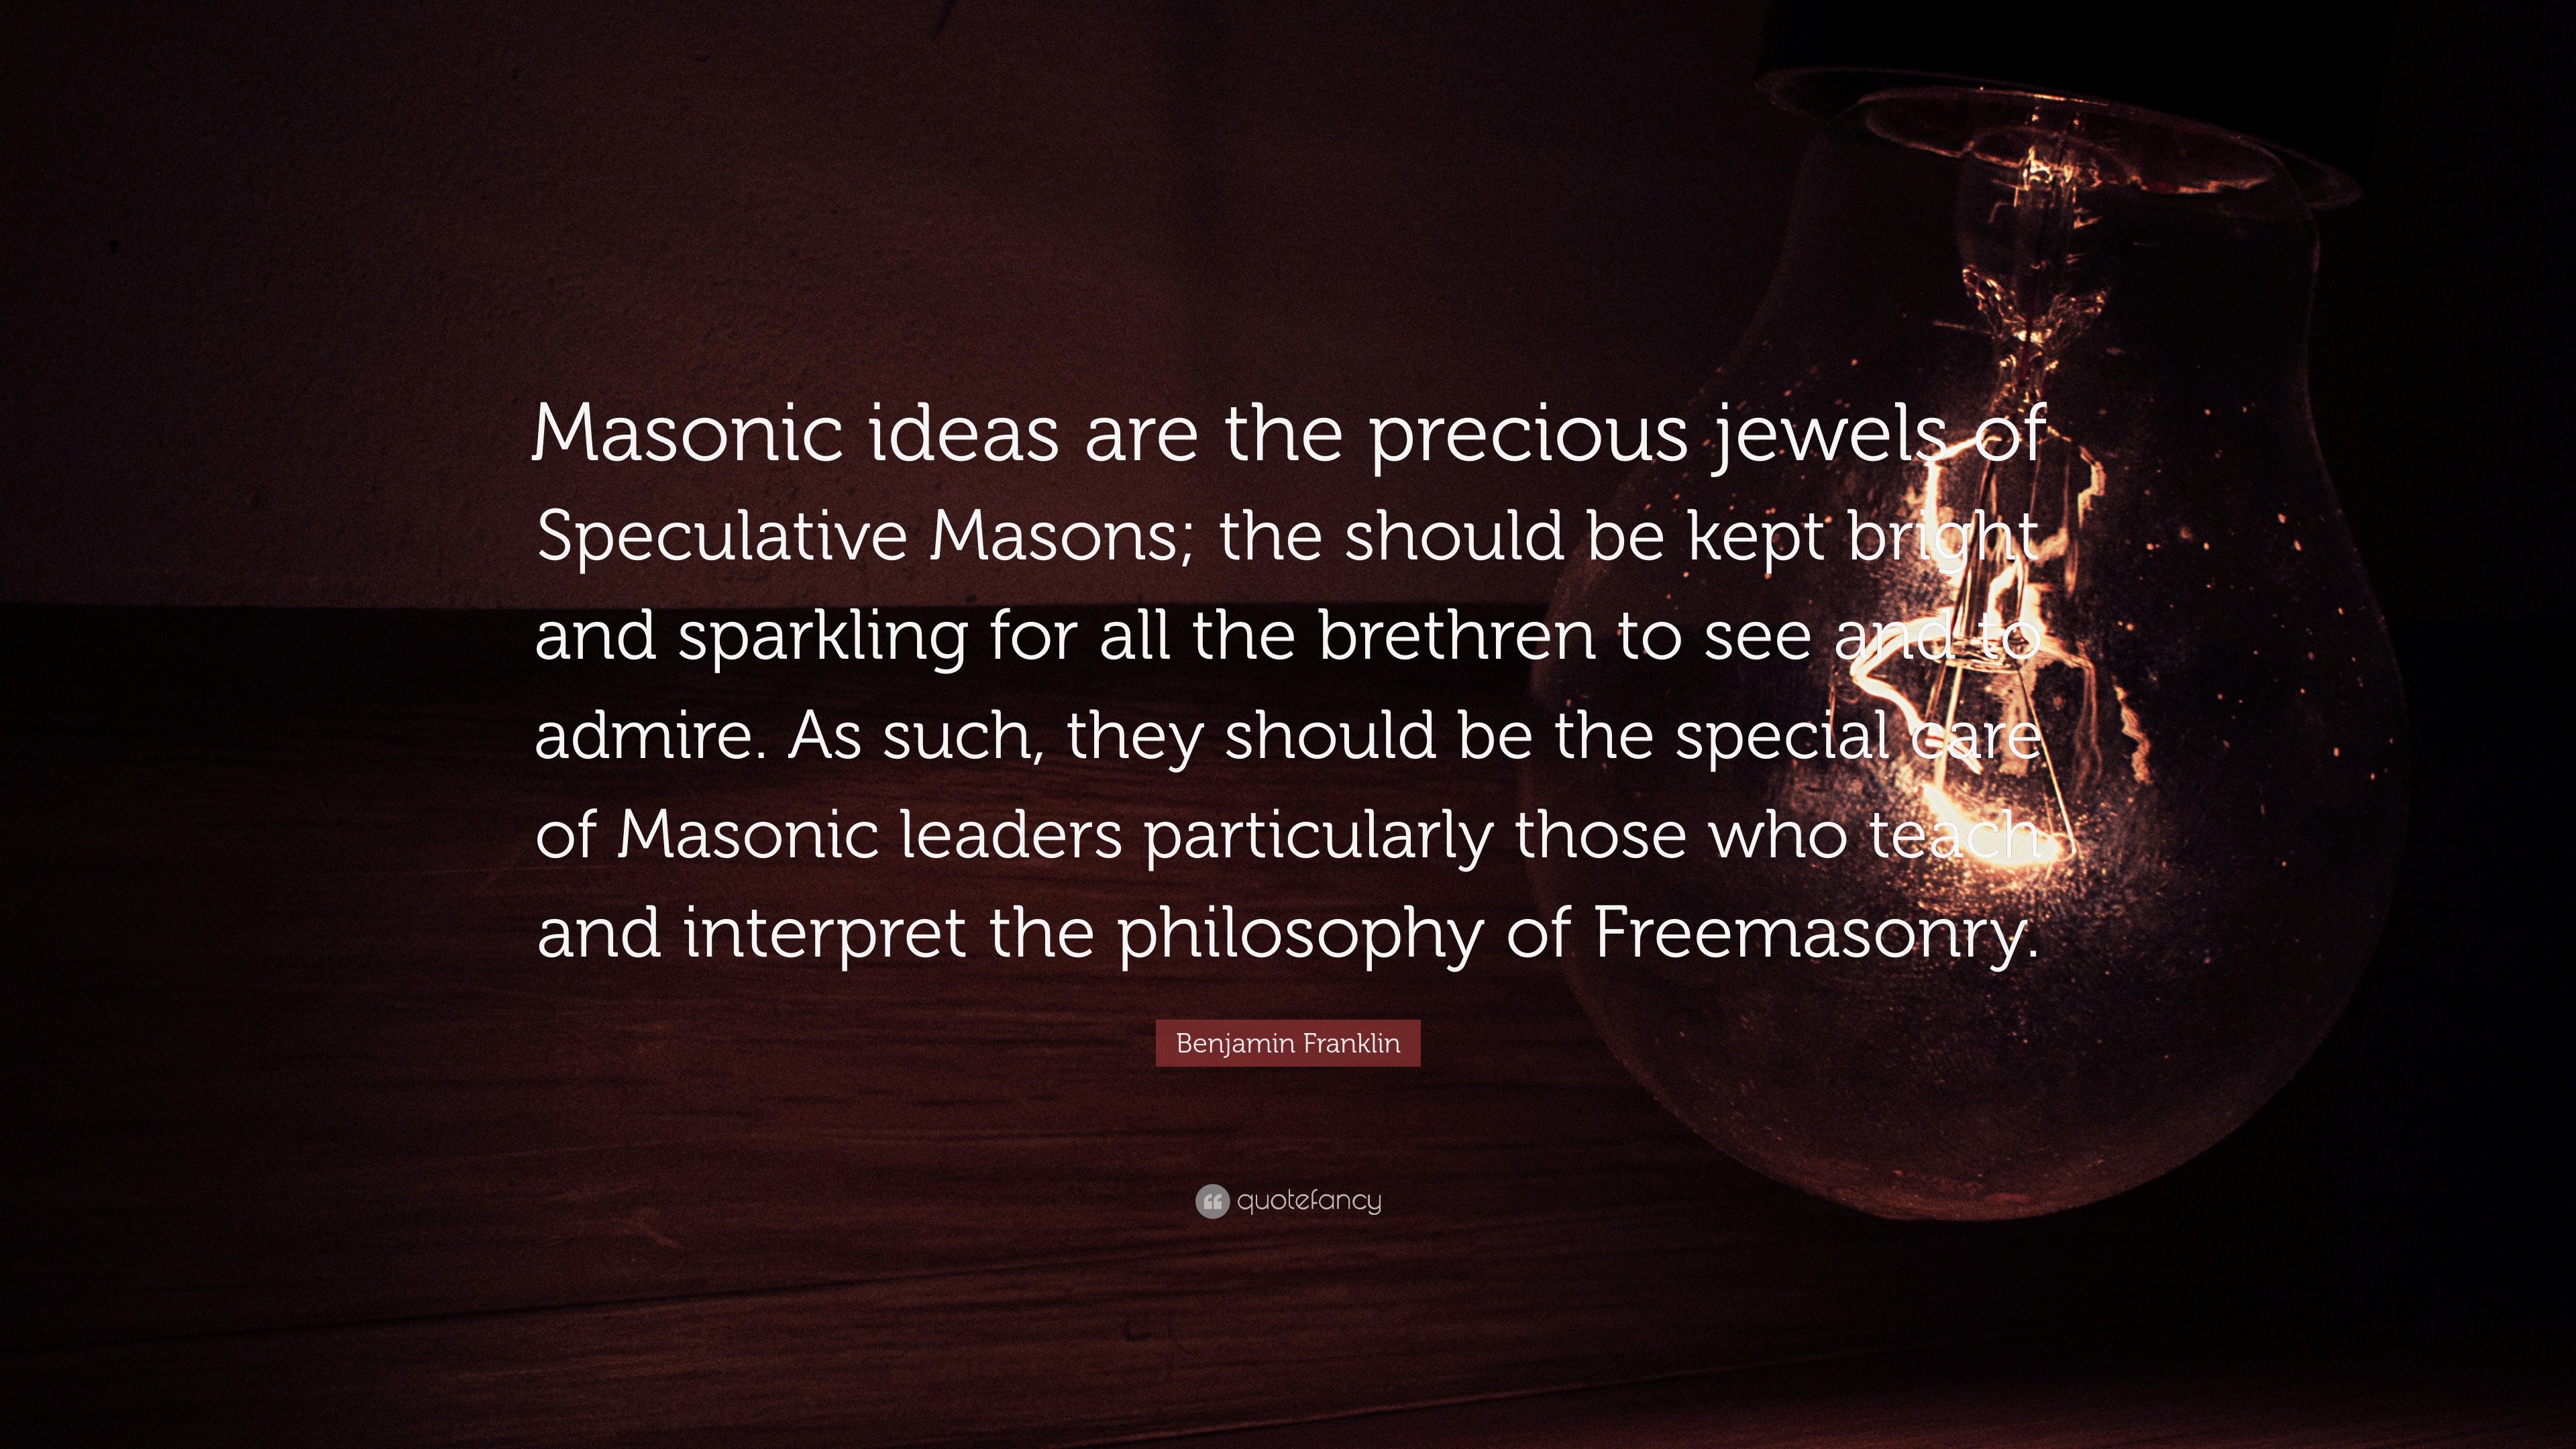 Benjamin Franklin Quote Masonic Ideas Are The Precious Jewels Of Speculative Masons The Should Be Kept Bright And Sparkling For All The Brethre